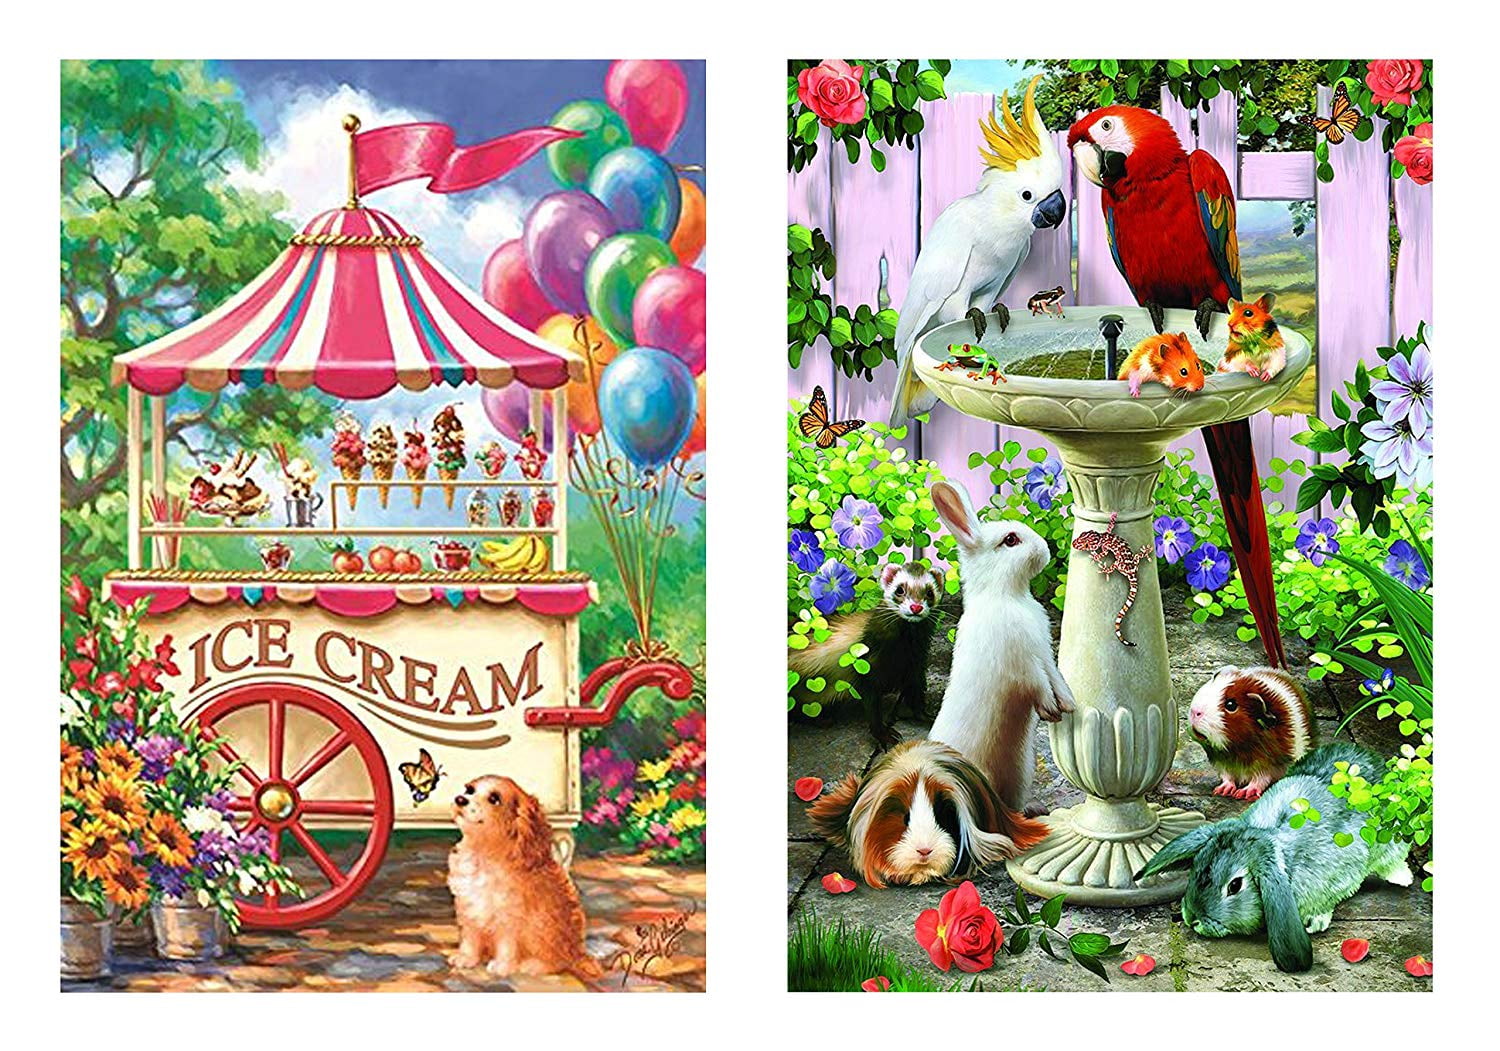 2000 Pieces Jigsaw Puzzles for Adults Virgin New Yorker Puzzles Educational Games Home Decoration Jigsaw Puzzles for Adults Kids